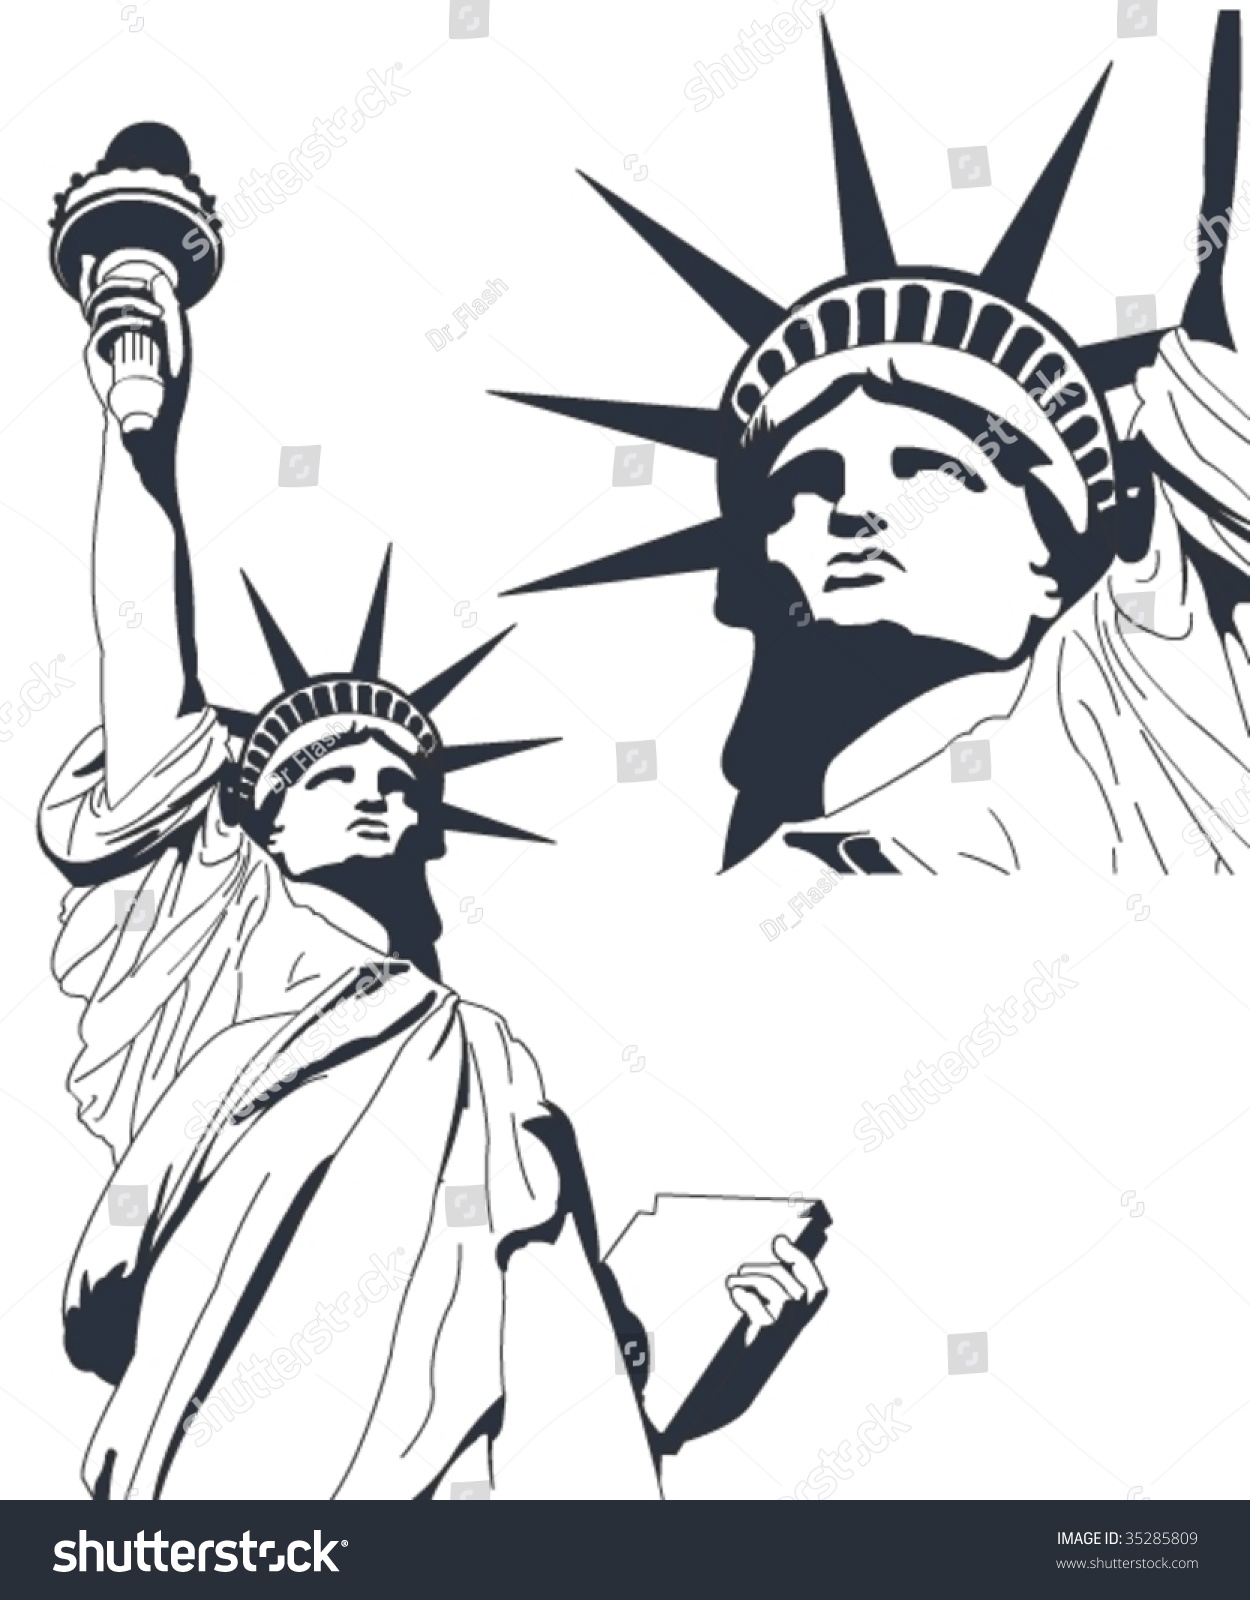 Statue Of Liberty In Very High Detail In Vector Art - Self Drawn